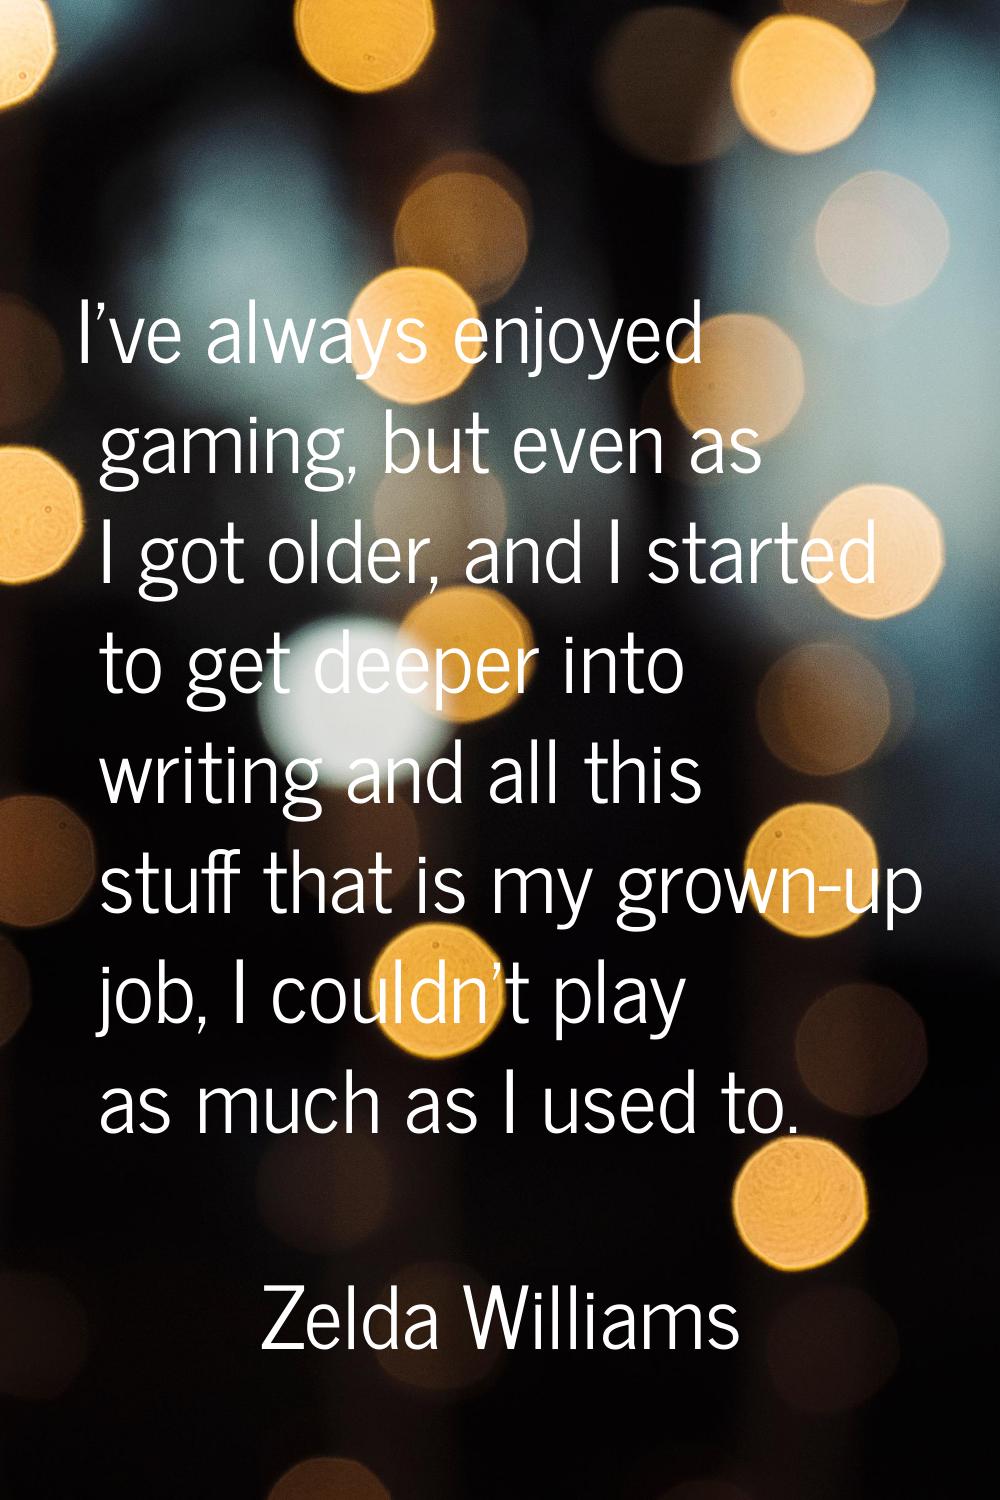 I've always enjoyed gaming, but even as I got older, and I started to get deeper into writing and a